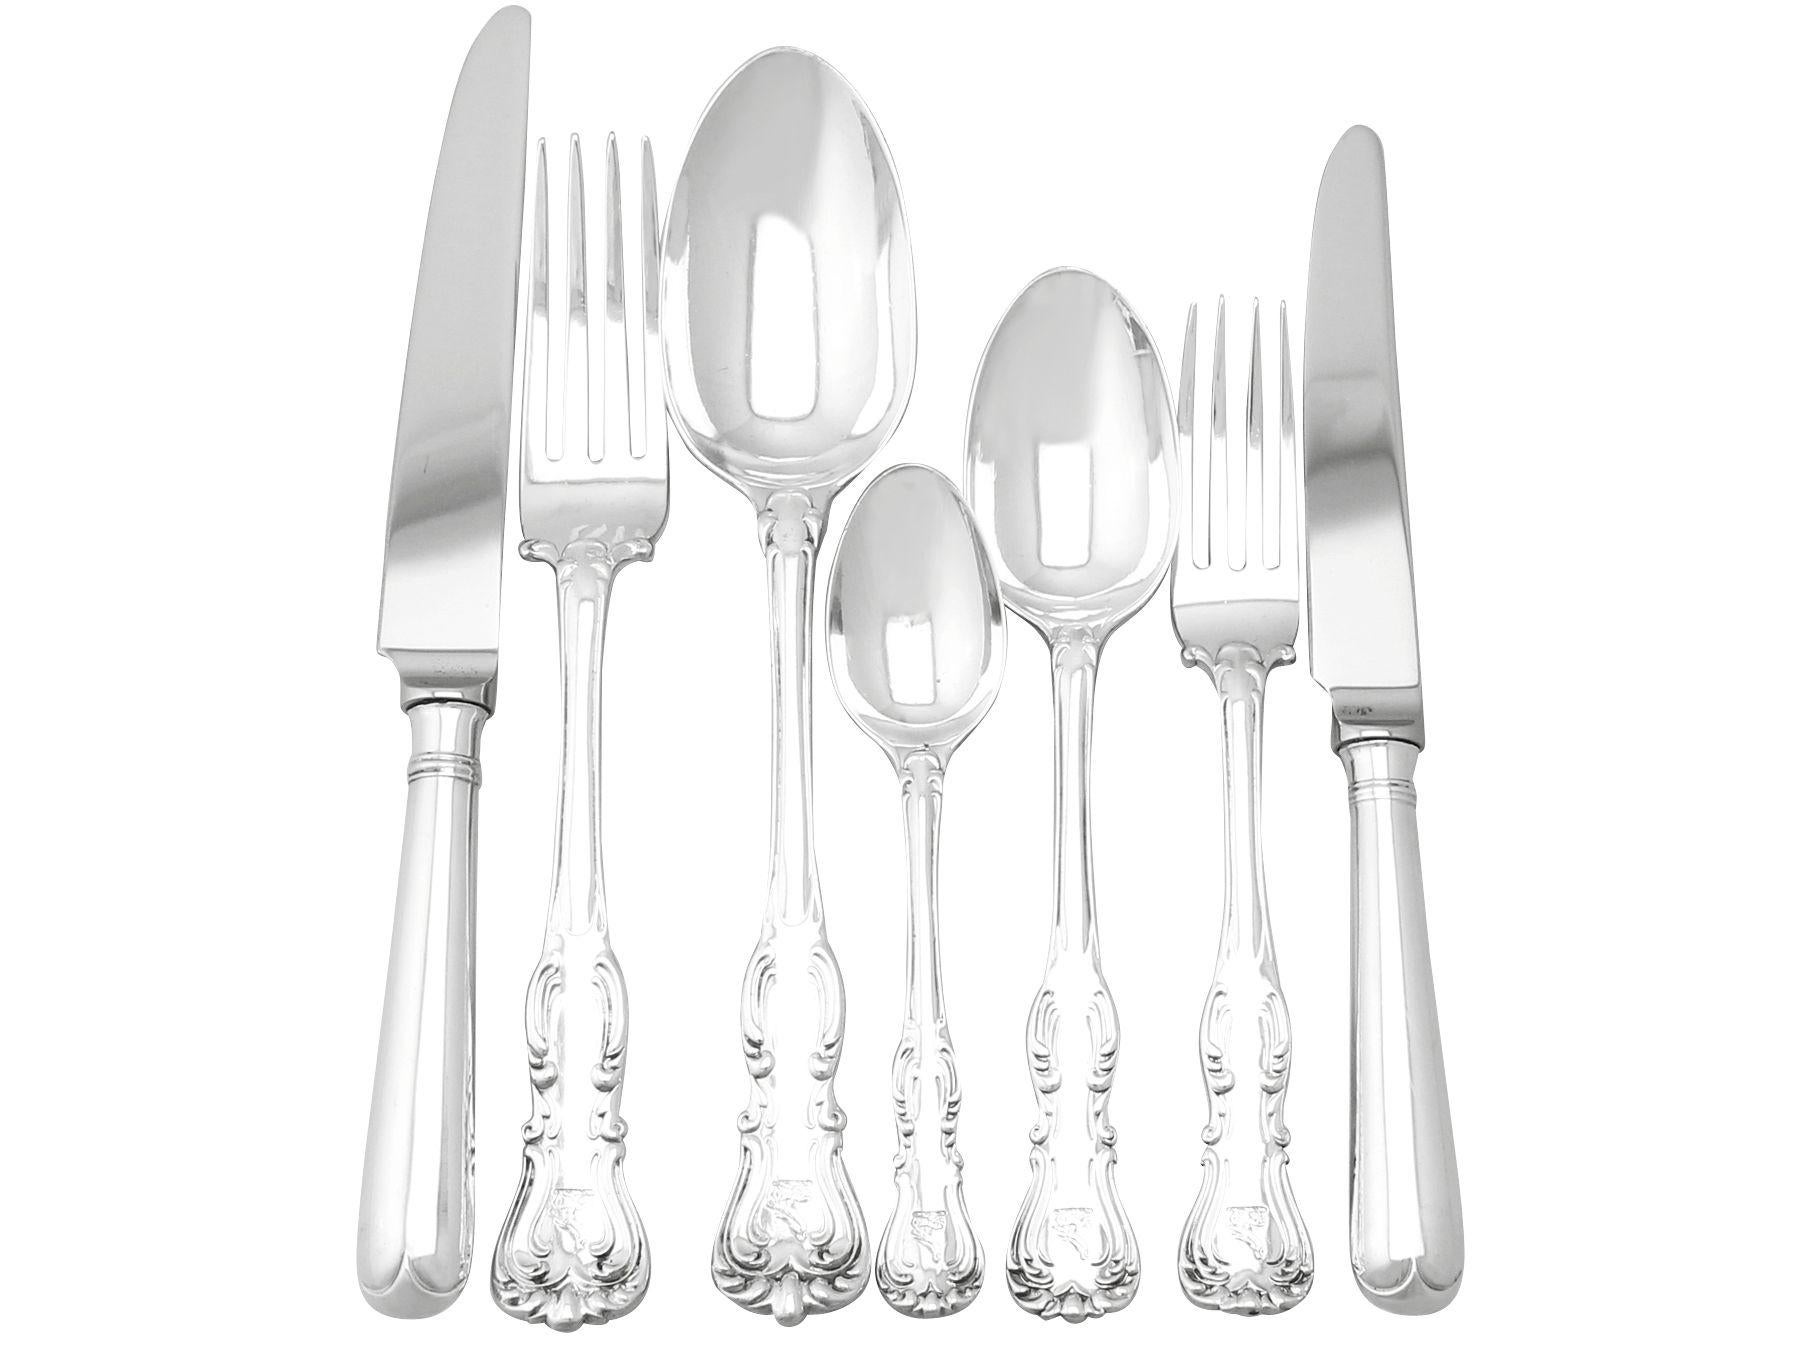 A magnificent, fine and impressive antique Victorian English sterling silver straight Devonshire pattern flatware service for twelve persons made by George Adams; an addition to our canteen of cutlery collection.

The pieces of this magnificent,